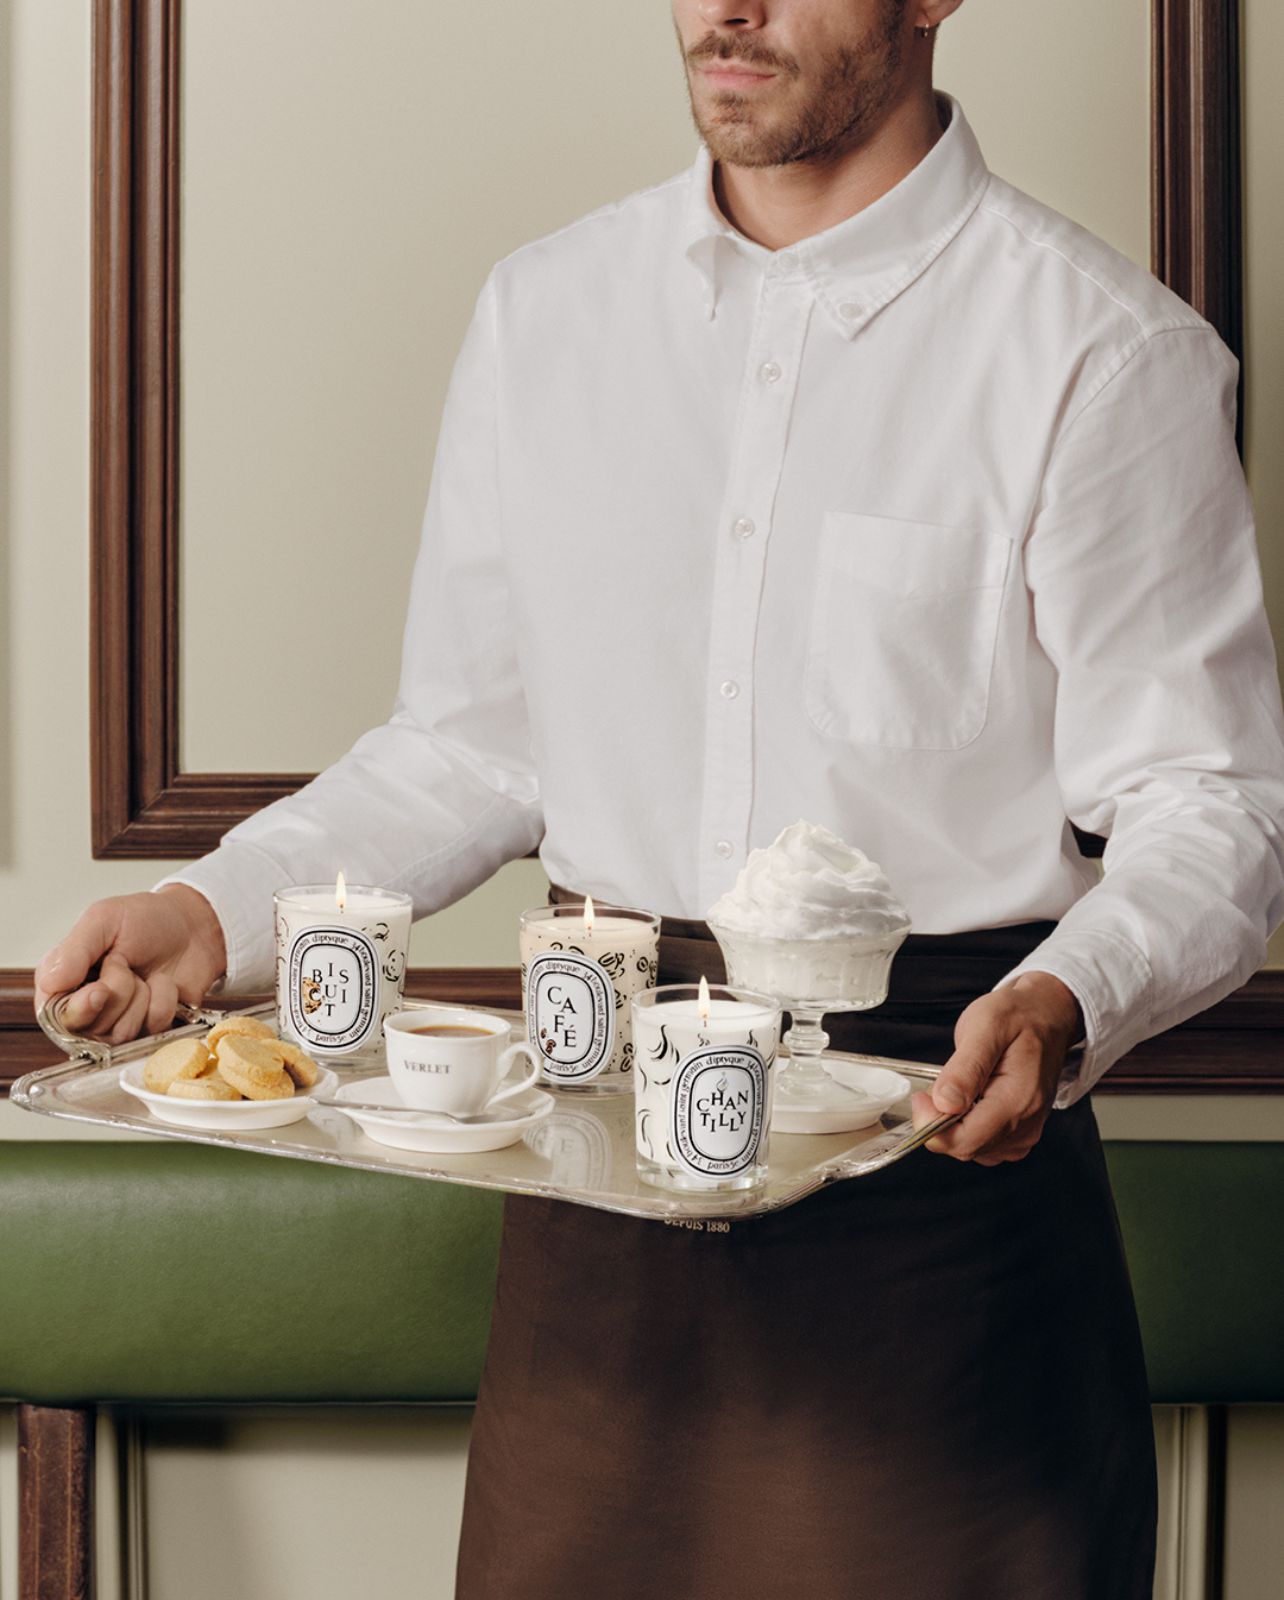 Man carrying a tray of Diptyque candles from the Café Verlet collection along with coffee and cookies